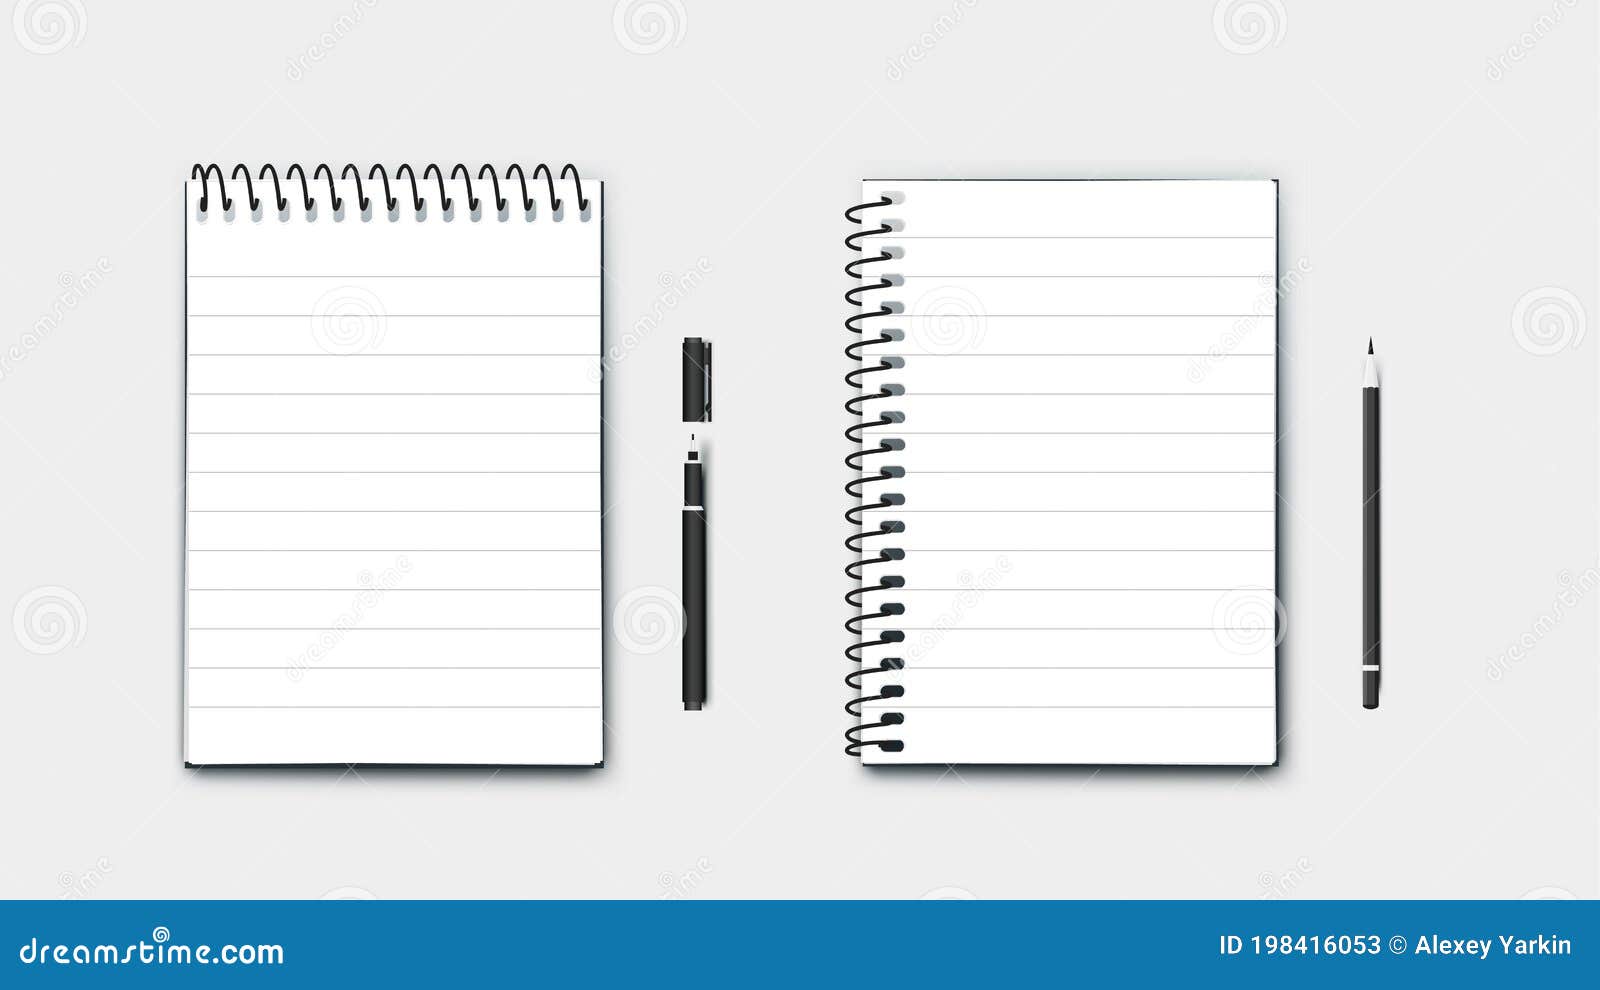 Blank realistic notebook size a4 isolated on white